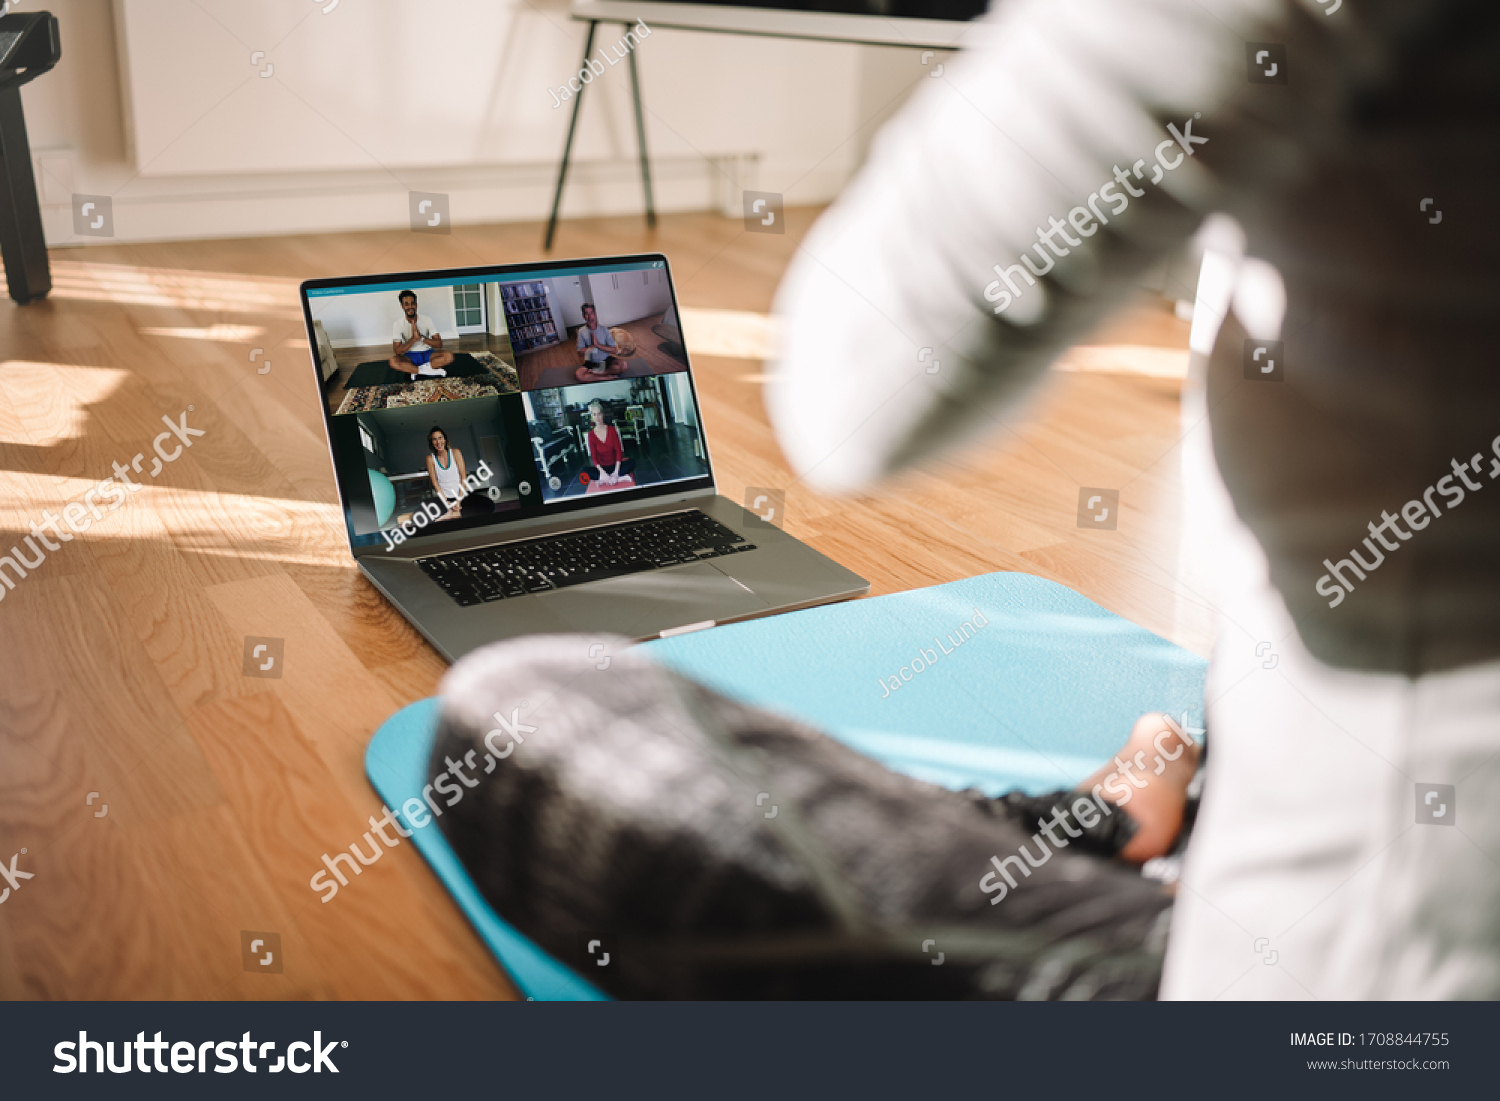 View of a woman conducting virtual fitness class with group of people at home on a video conference. Fitness instructor taking online yoga classes over a video call in laptop. #1708844755